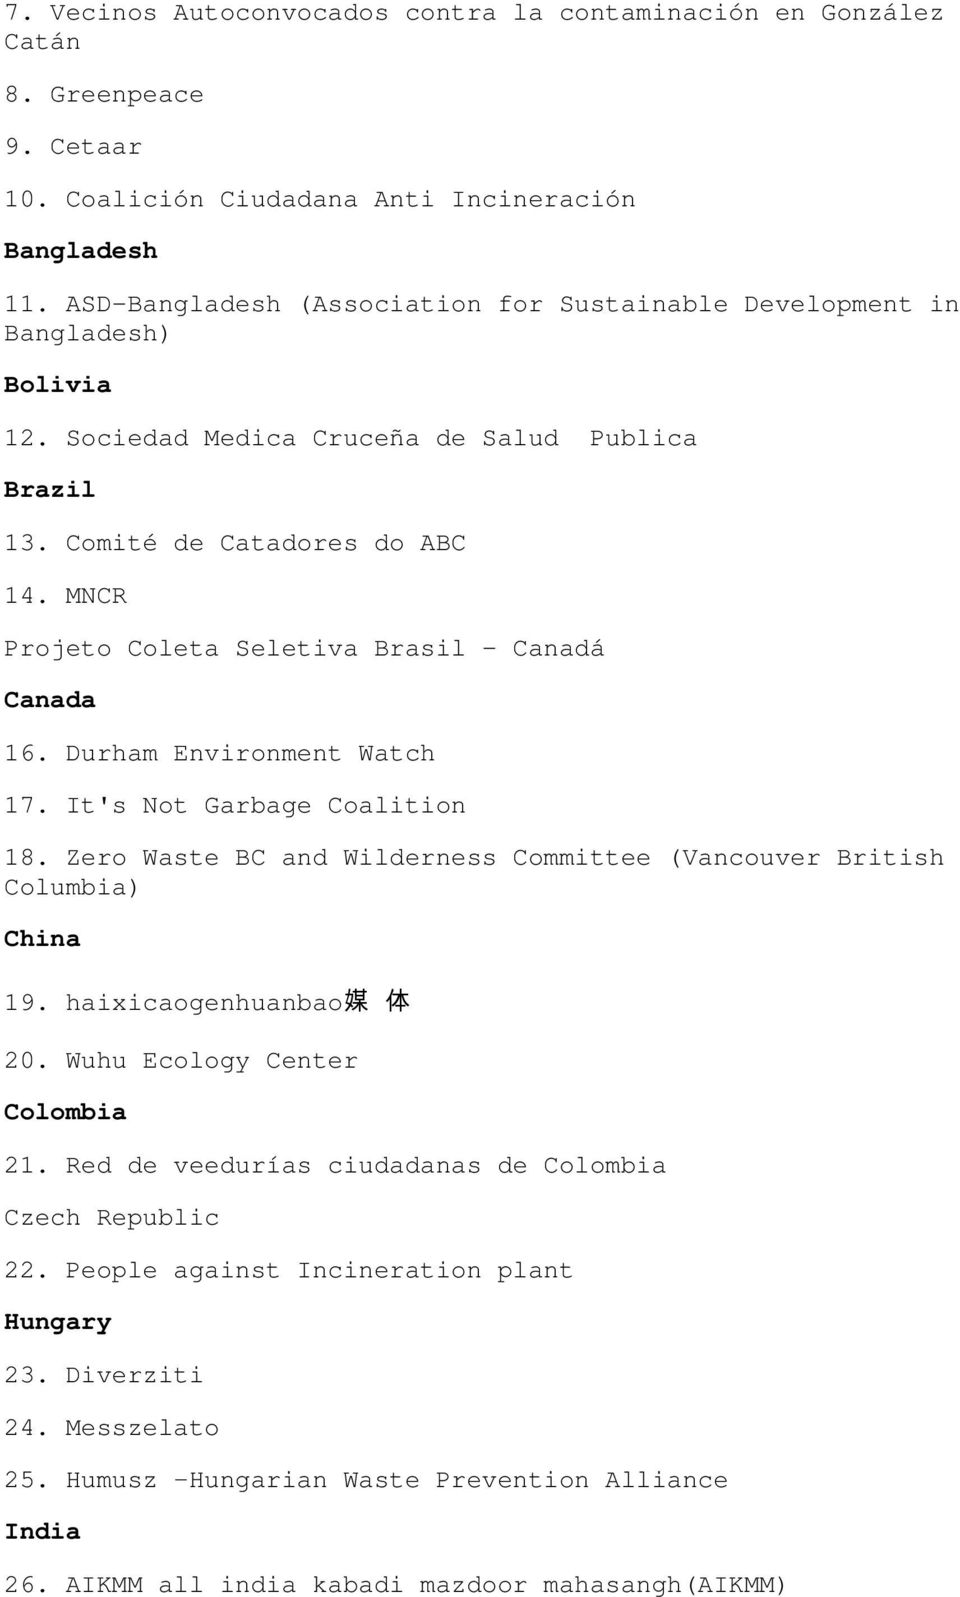 MNCR Projeto Coleta Seletiva Brasil - Canadá Canada 16. Durham Environment Watch 17. It's Not Garbage Coalition 18. Zero Waste BC and Wilderness Committee (Vancouver British Columbia) China 19.